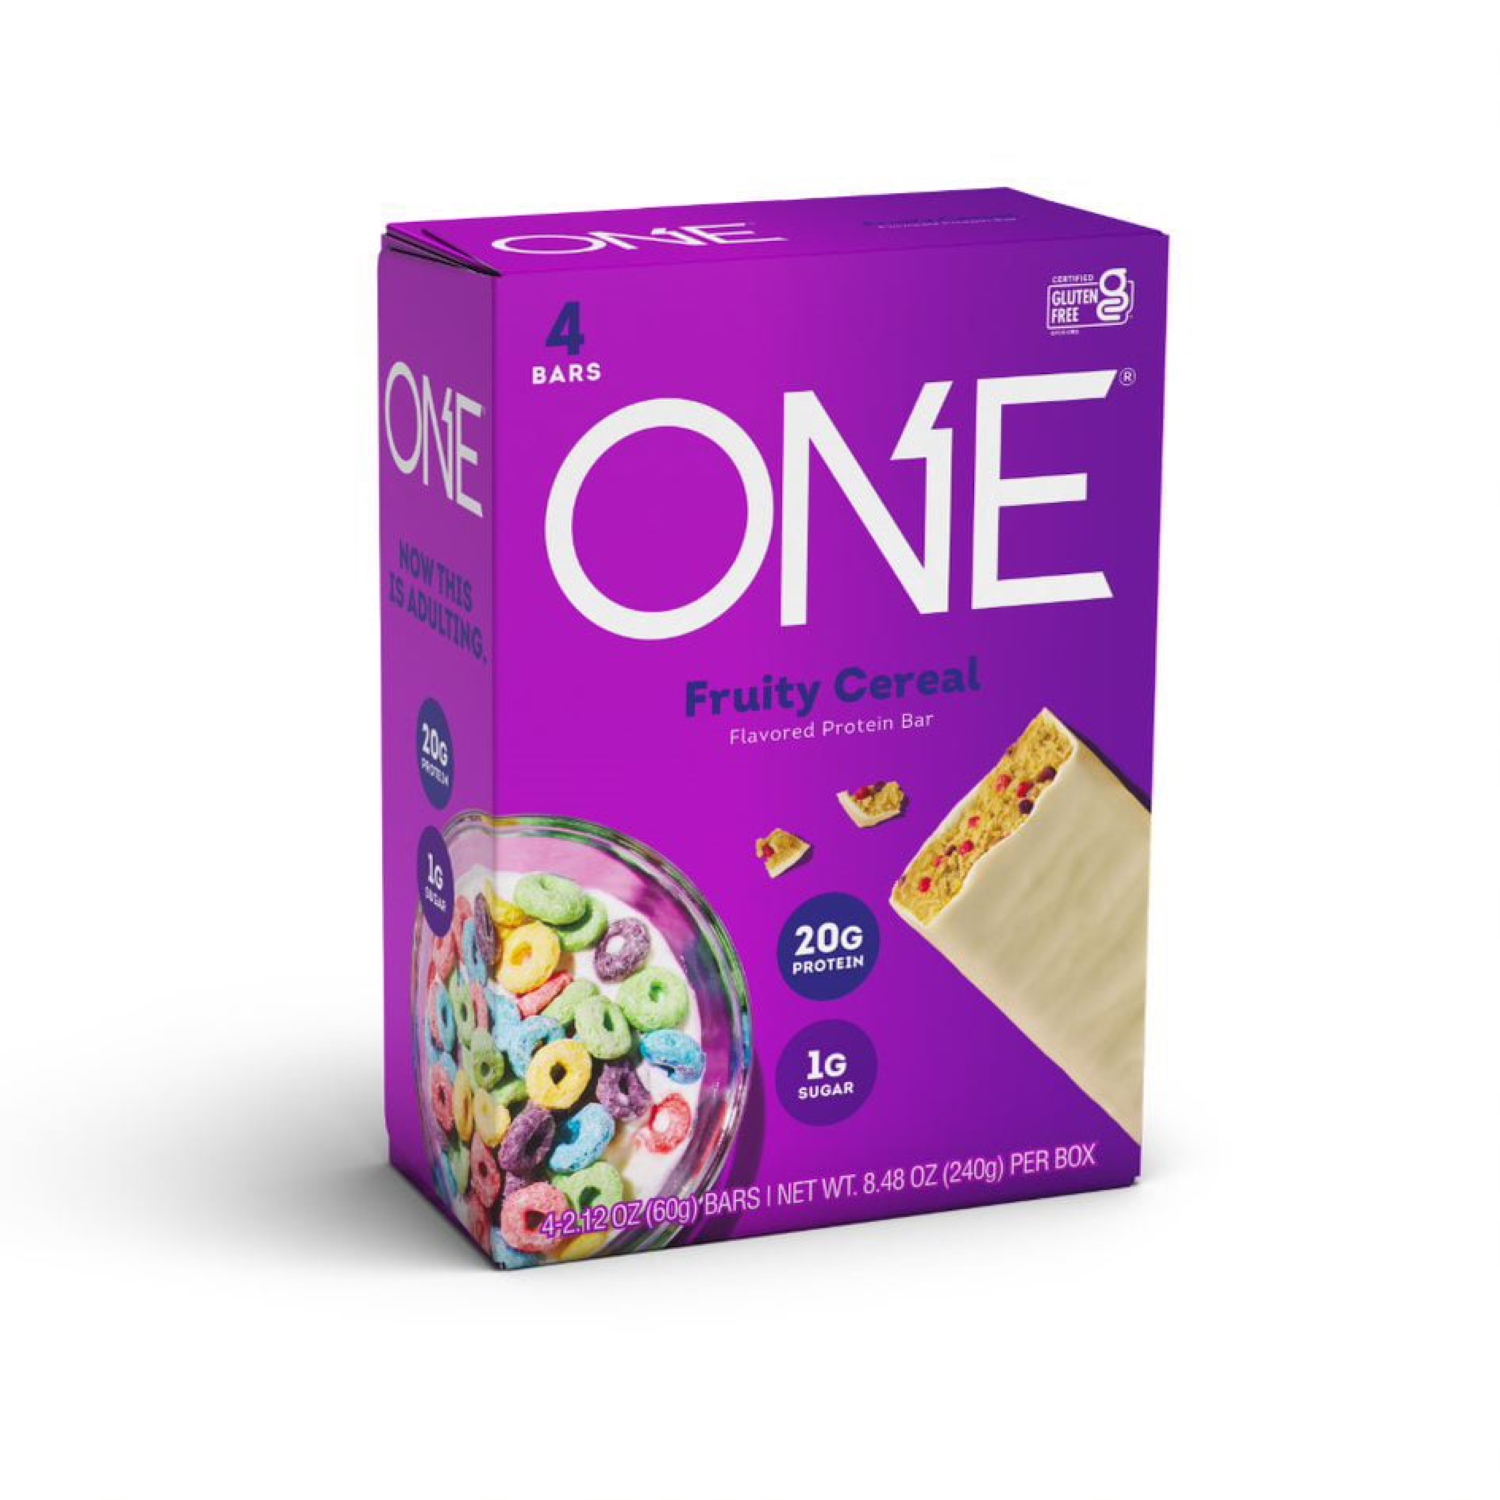 One Protein Bar, Fruity Cereal, 20g Protein, 4 Ct - image 1 of 5